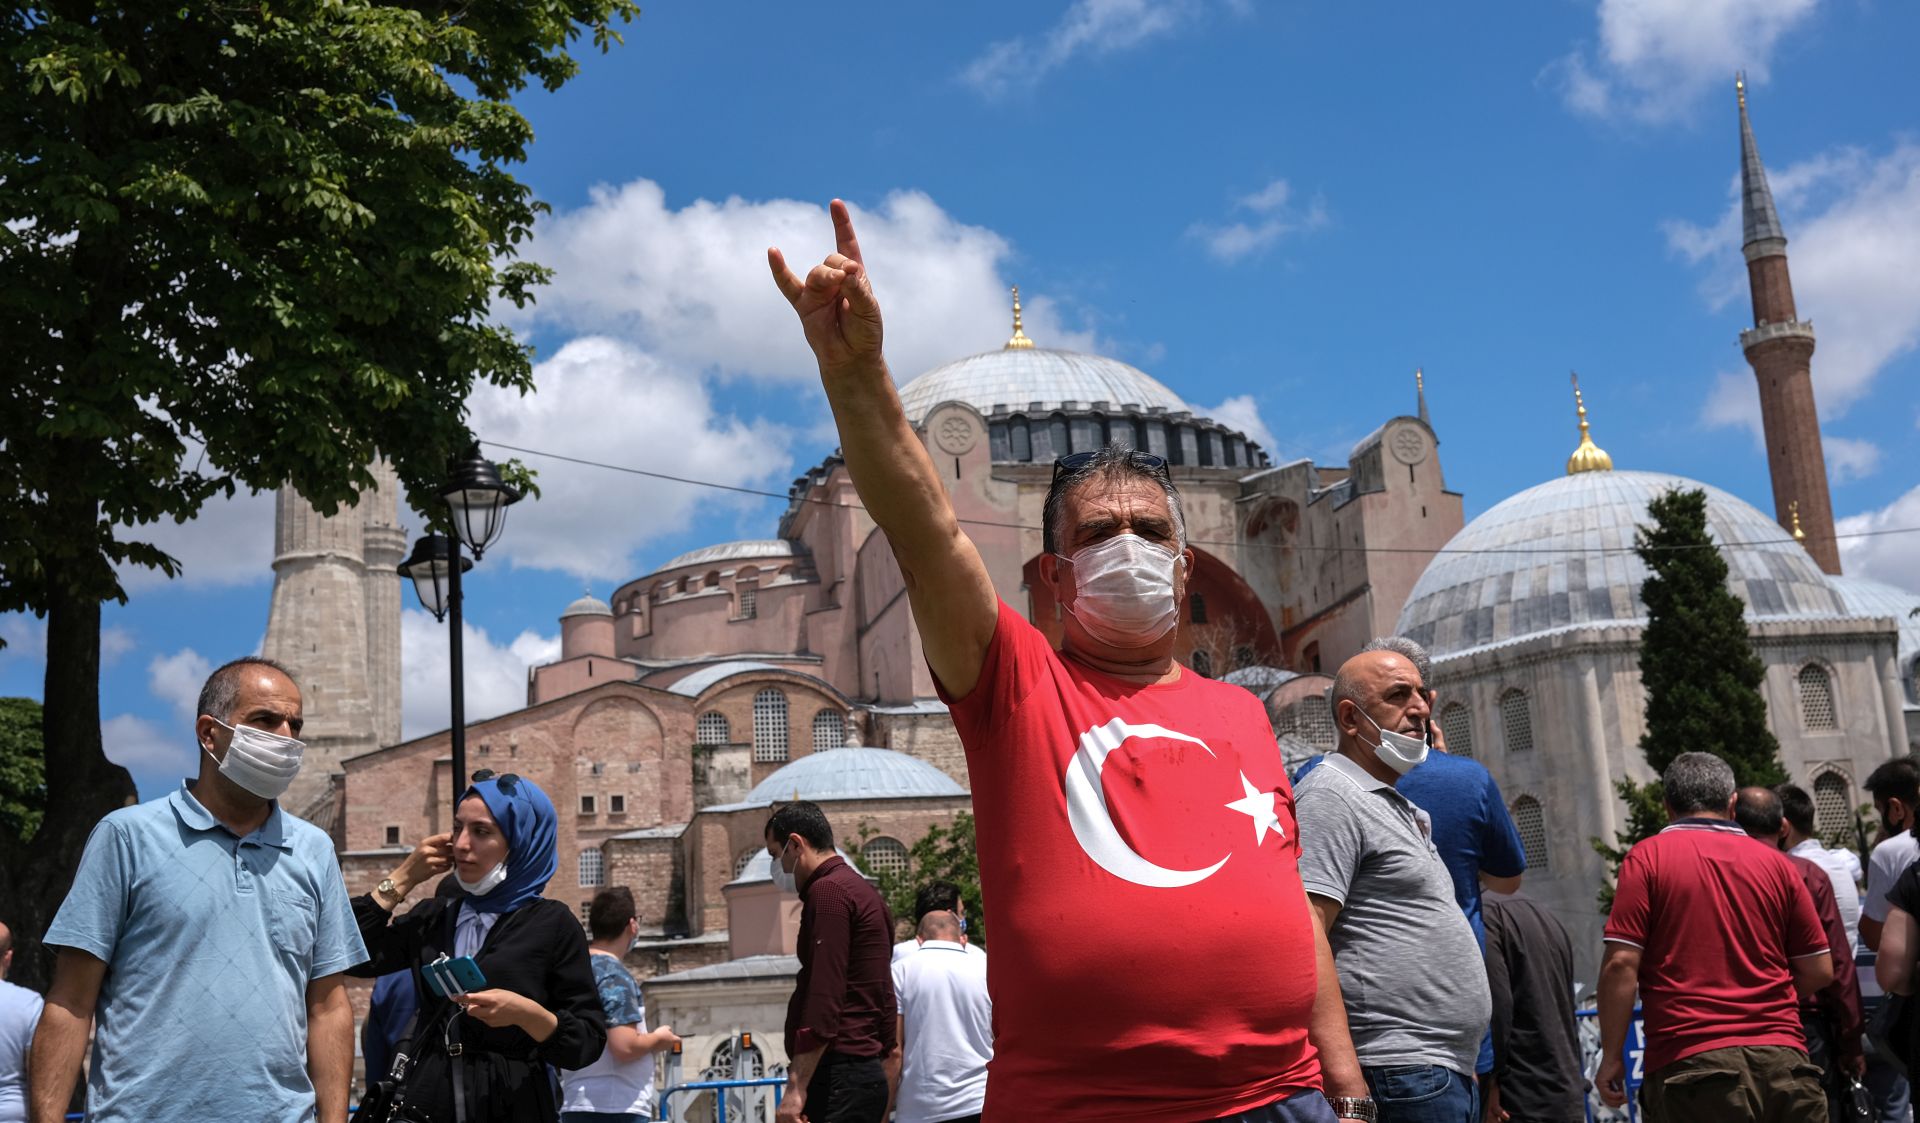 epa08551728 A Turkish nationalist flashes a grey wolf sign which is the symbol of Turkish Nationalists in front of the Hagia Sophia as Turkish people continue to celebrate Turkey's decision that the 1,500 year old UNESCO World Heritage site Hagia Sophia can be converted into a mosque, in Istanbul, Turkey, 17 July 2020. Turkey's highest administration court on 10 July 2020 ruled that the museum that was once a mosque built in a Cathedral can be turned into a mosque again by annulling its status as museum. Hagia Sophia will open on 24 July 2020 as a mosque and Turkish President Recep Tayyip Erdogan will attend first Friday pray.  EPA/SEDAT SUNA